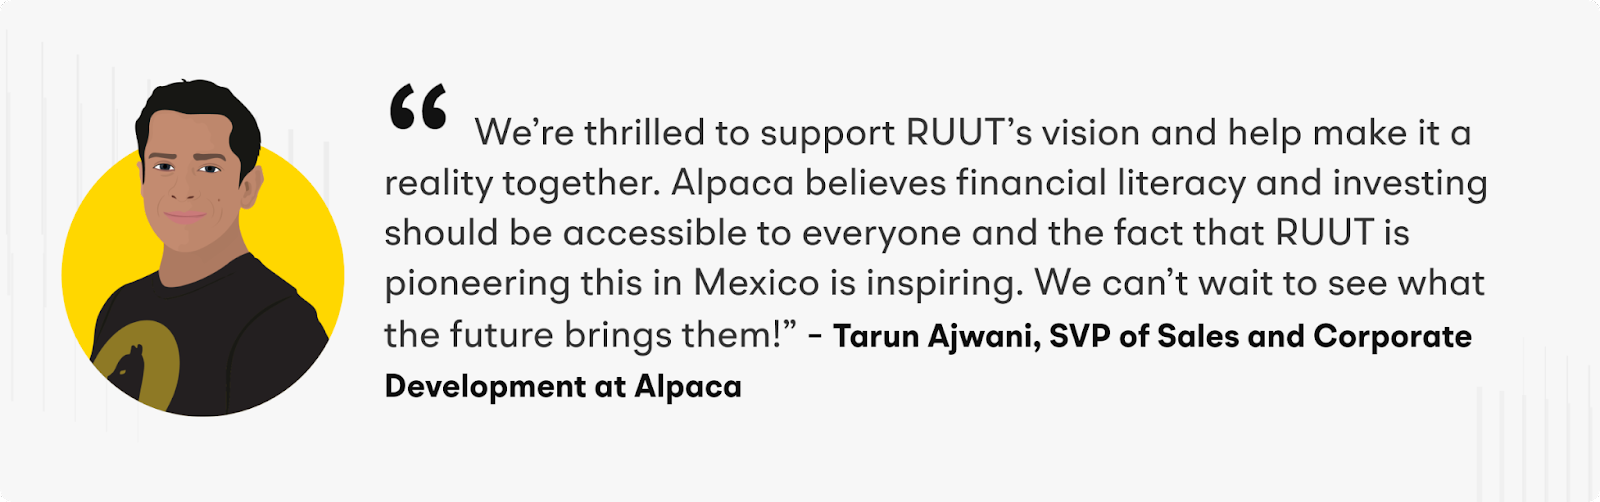 “We’re thrilled to support RUUT’s vision and help make it a reality together. Alpaca believes financial literacy and investing should be accessible to everyone and the fact that RUUT is pioneering this in Mexico is inspiring. We can’t wait to see what the future brings them!” – Tarun Ajwani, SVP of Sales and Corporate Development at Alpaca